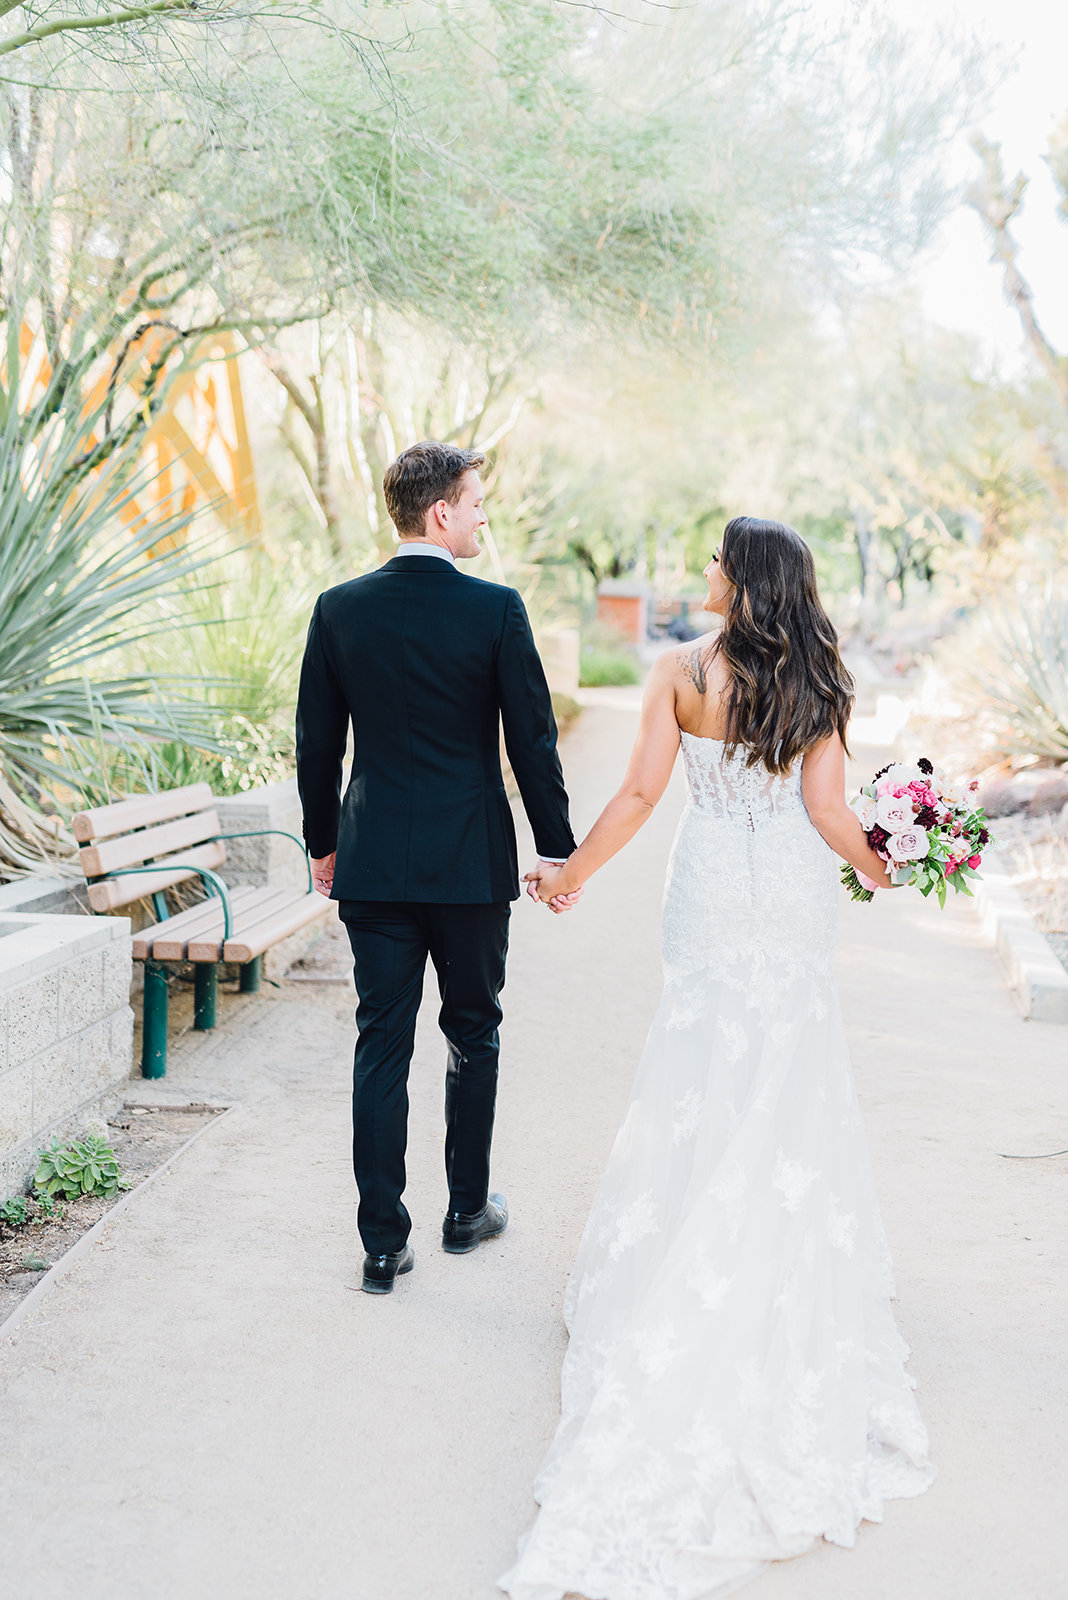 Why You Need to Hire a Videographer for Your Elopement This Year | Las Vegas Weddings and Elopements | Las Vegas Elopement | Las Vegas Wedding Planner | Las Vegas Elopement Planner | Las Vegas Micro Wedding